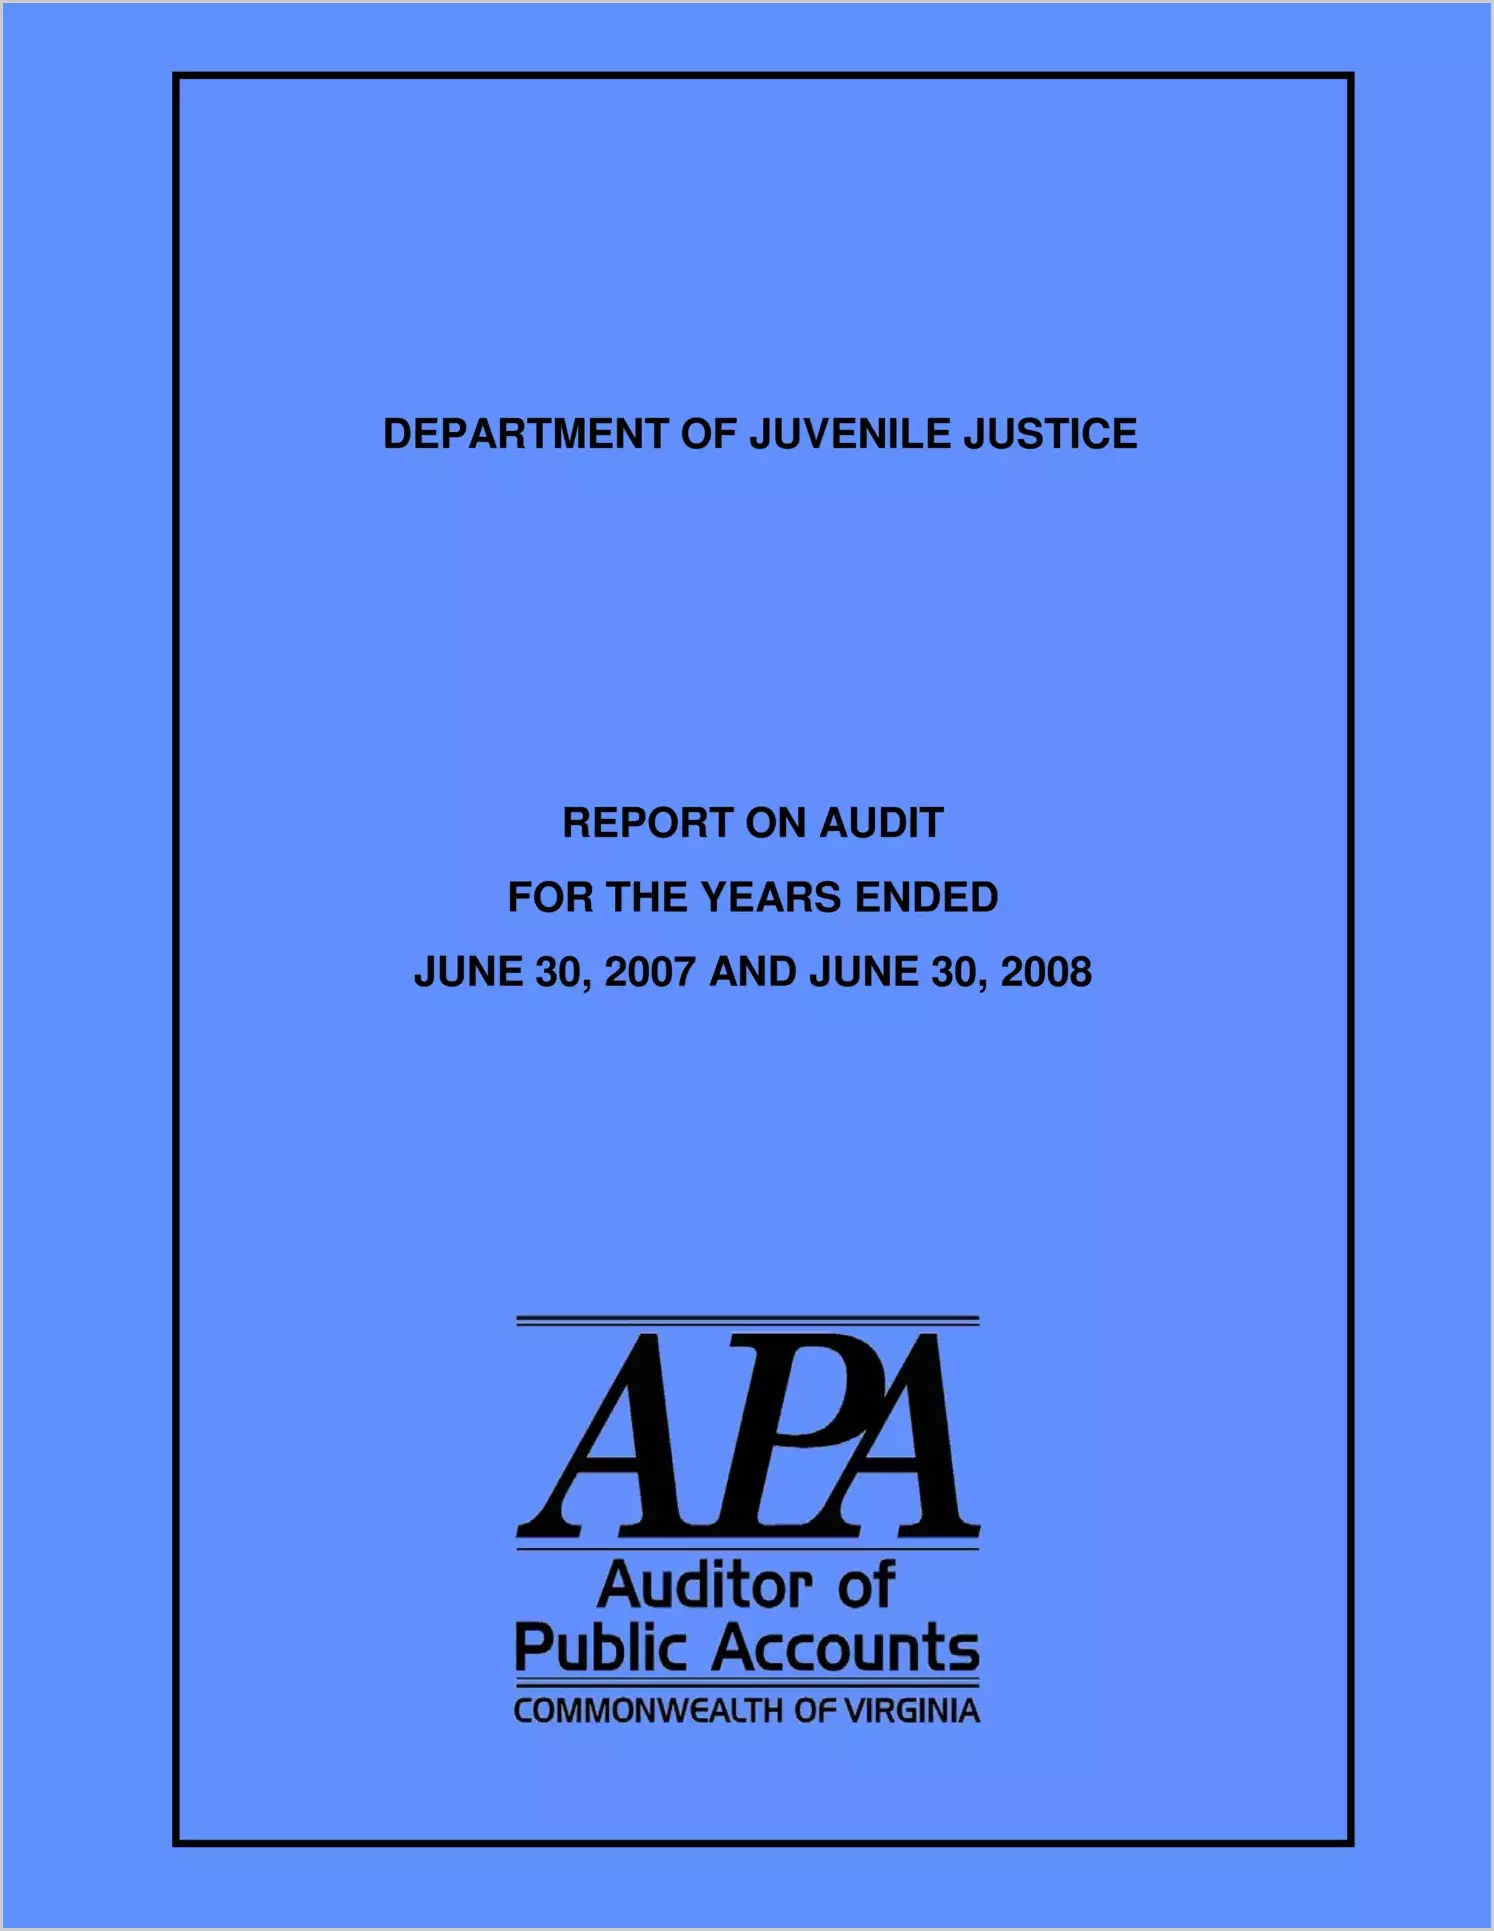 Department of Juvenile Justice for the years ended June 30, 2007 and June 30, 2008